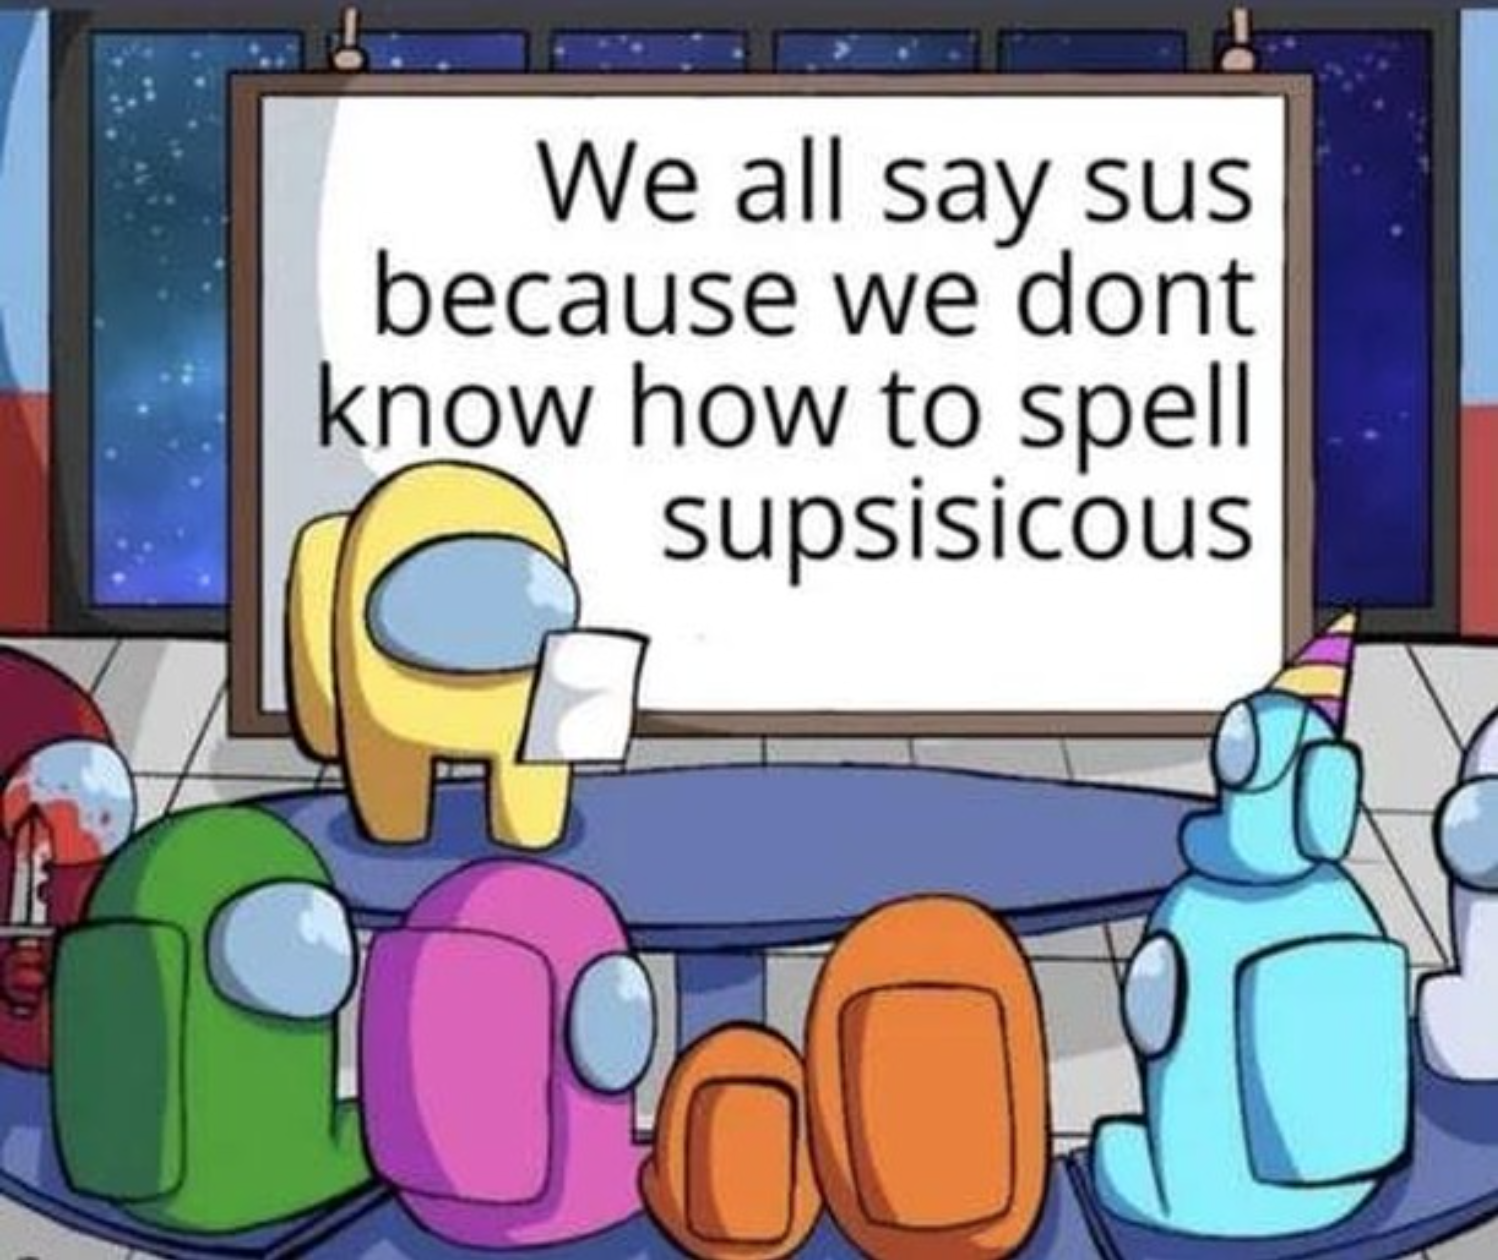 funny gaming memes  - among us meme - We all say sus because we dont know how to spell supsisicous 02 Ou